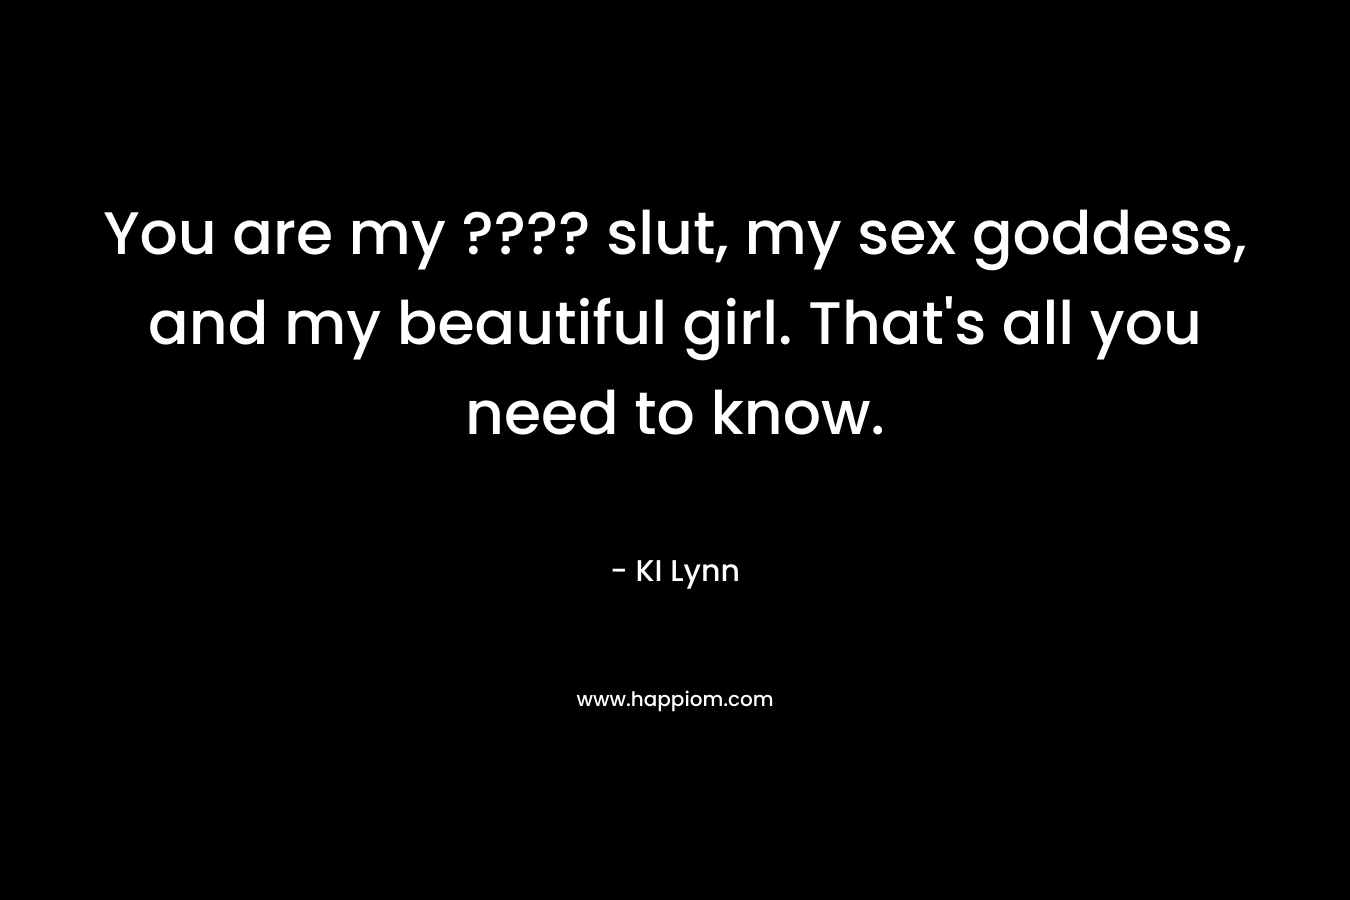 You are my ???? slut, my sex goddess, and my beautiful girl. That's all you need to know.